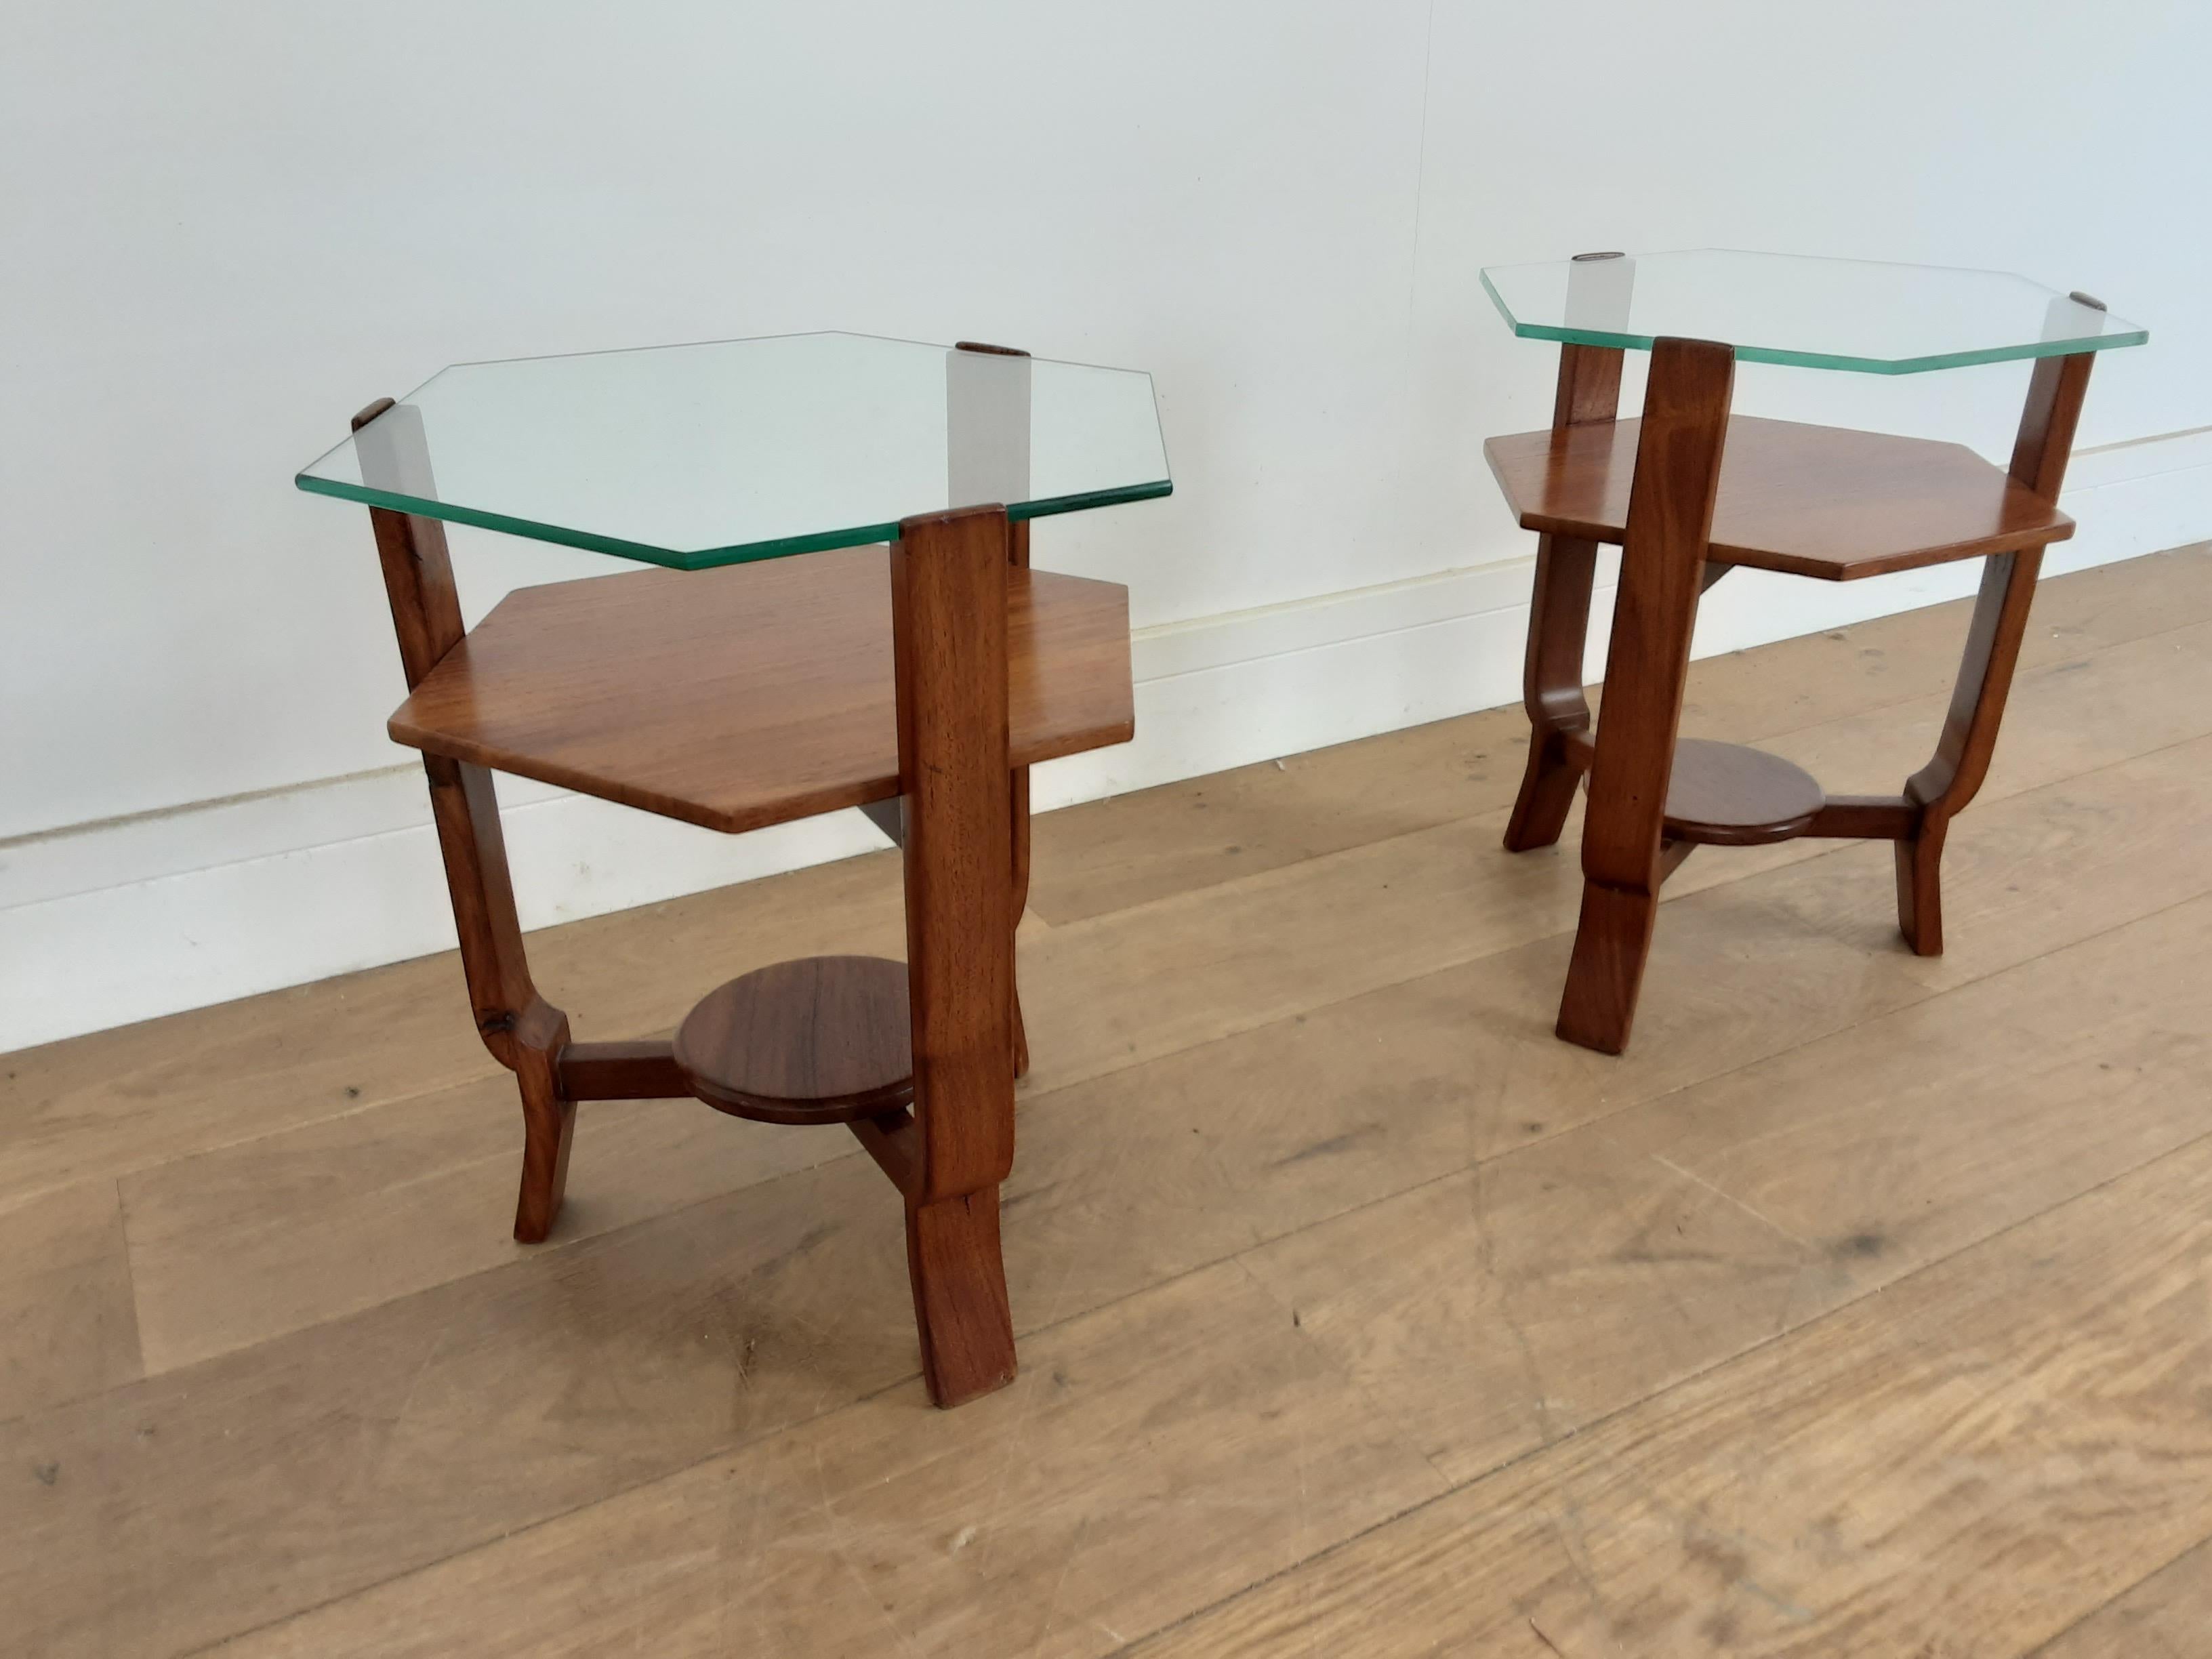 An unusual little pair of side tables, very pretty glass toped hexagonal walnut tables.
Measures: 40 cm h 35 cm w and 31 cm d
British, circa 1930.